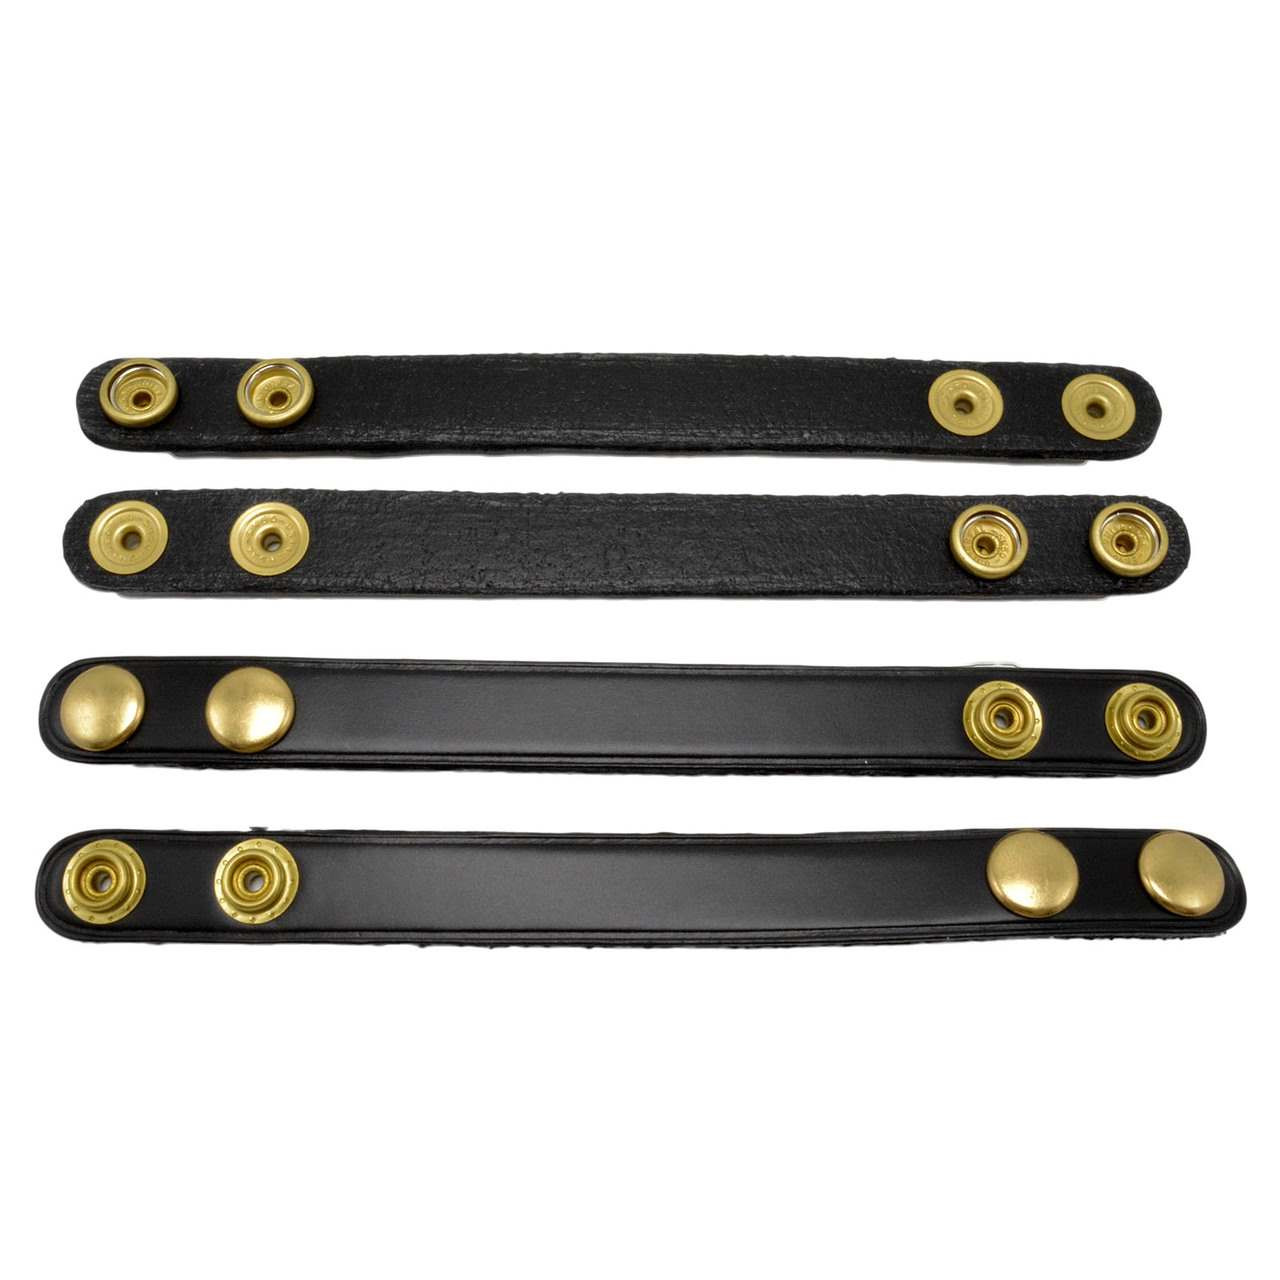 Perfect Fit Duty Belt Keepers 3/4 Plain Genuine Leather - 4 Pack